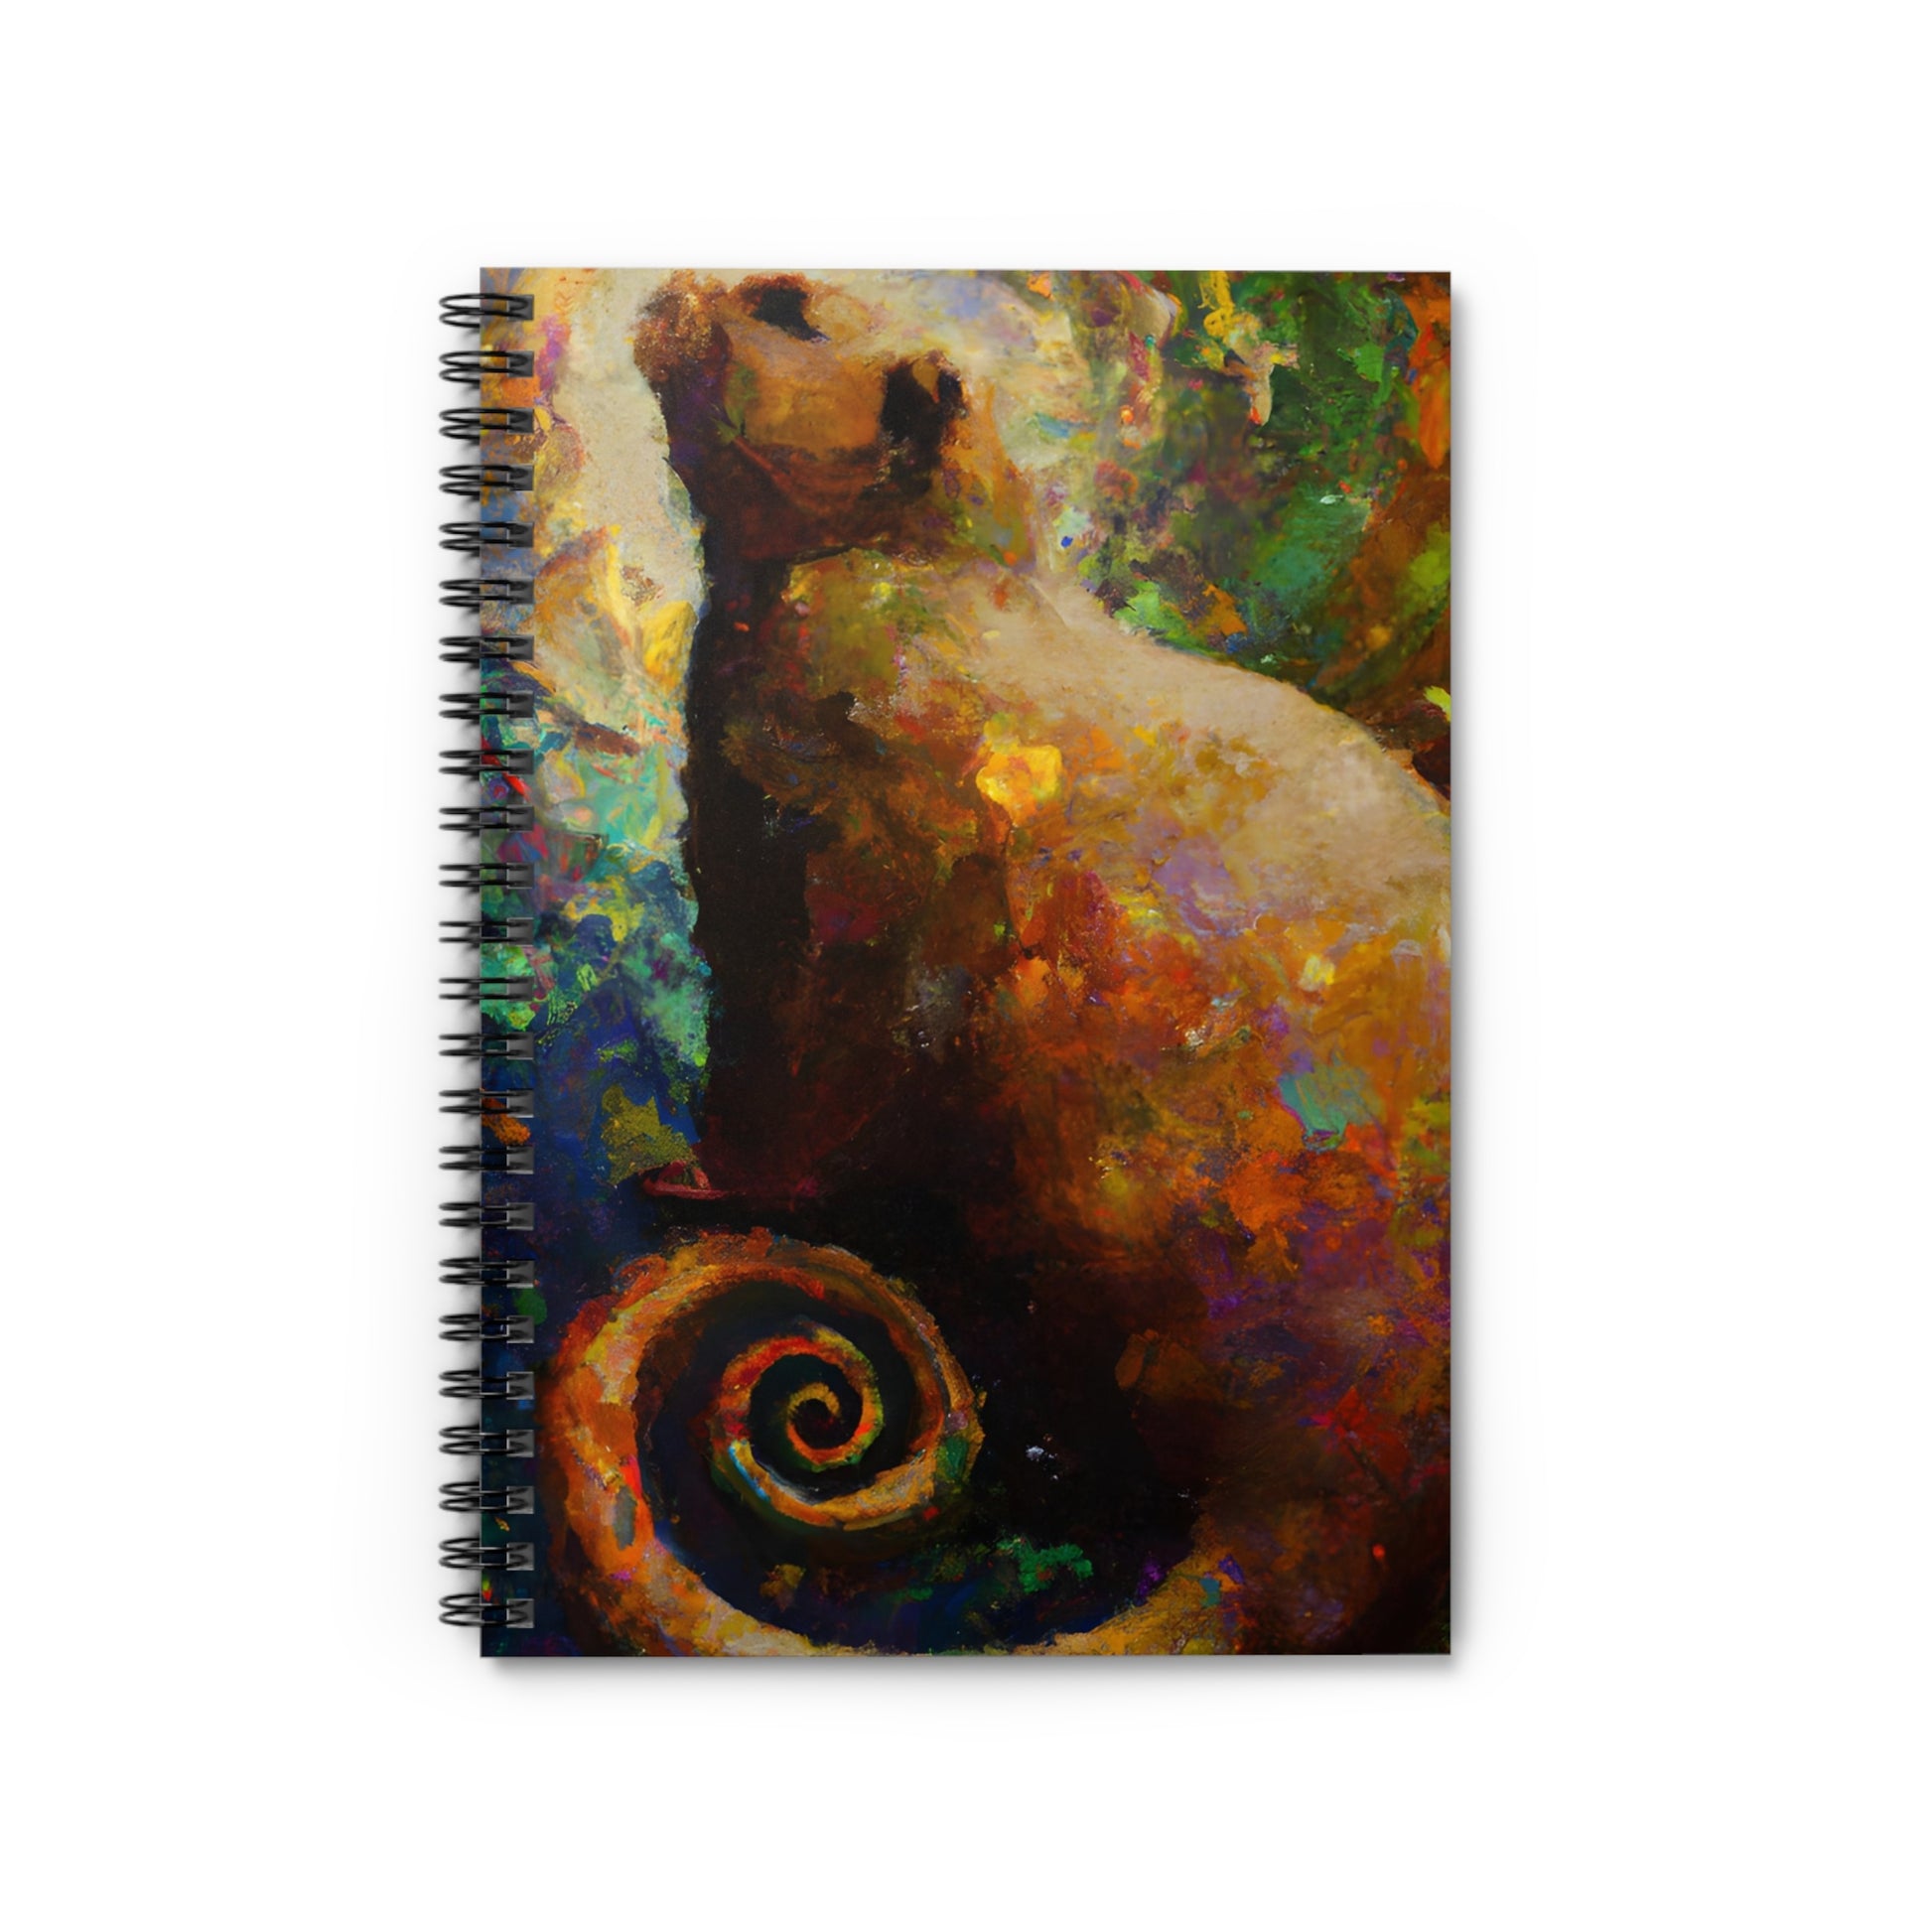 Canvassias Notebook Journal